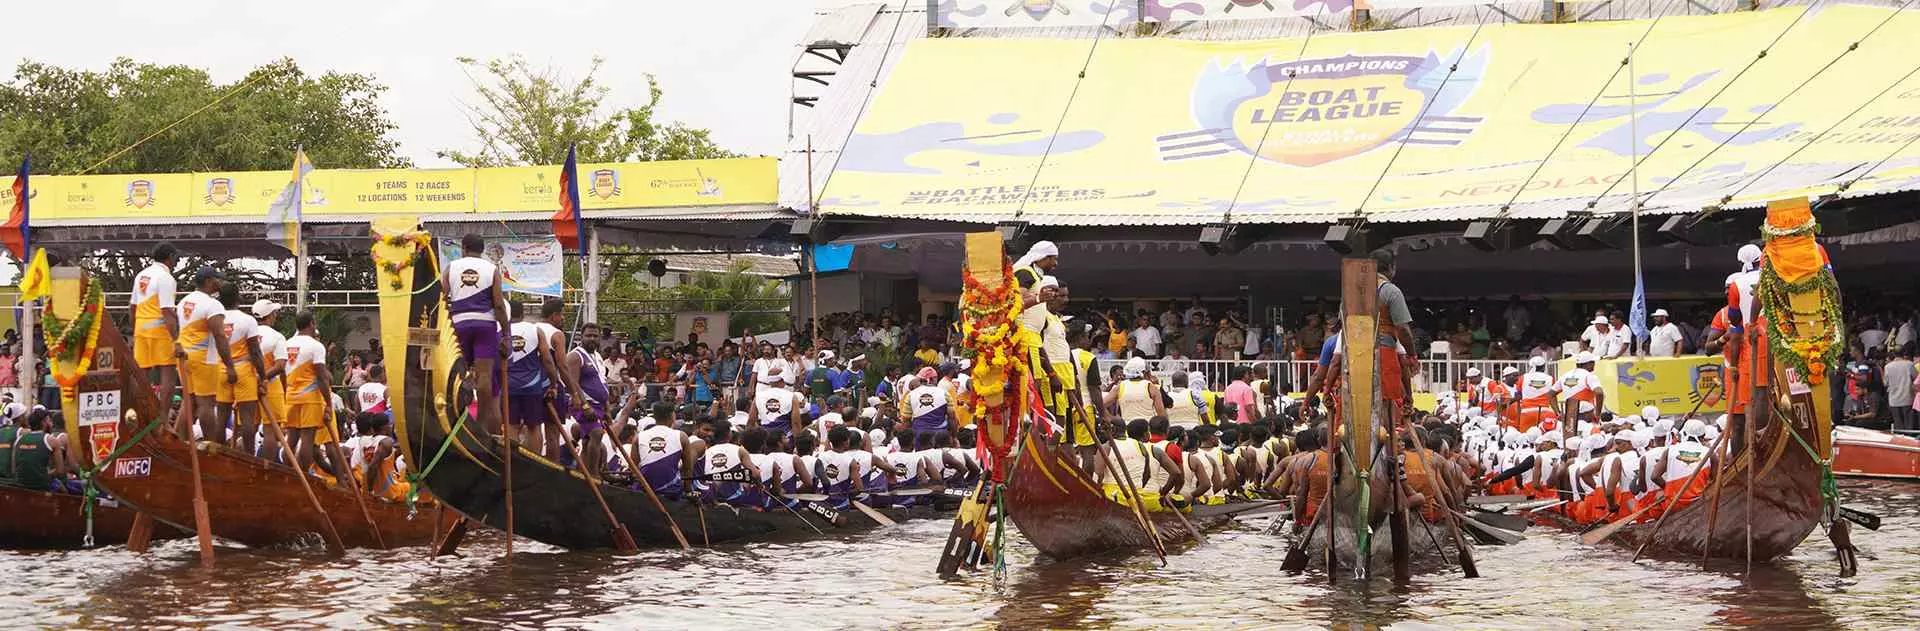 Champions Boat League set to boost Kerala tourism: Official